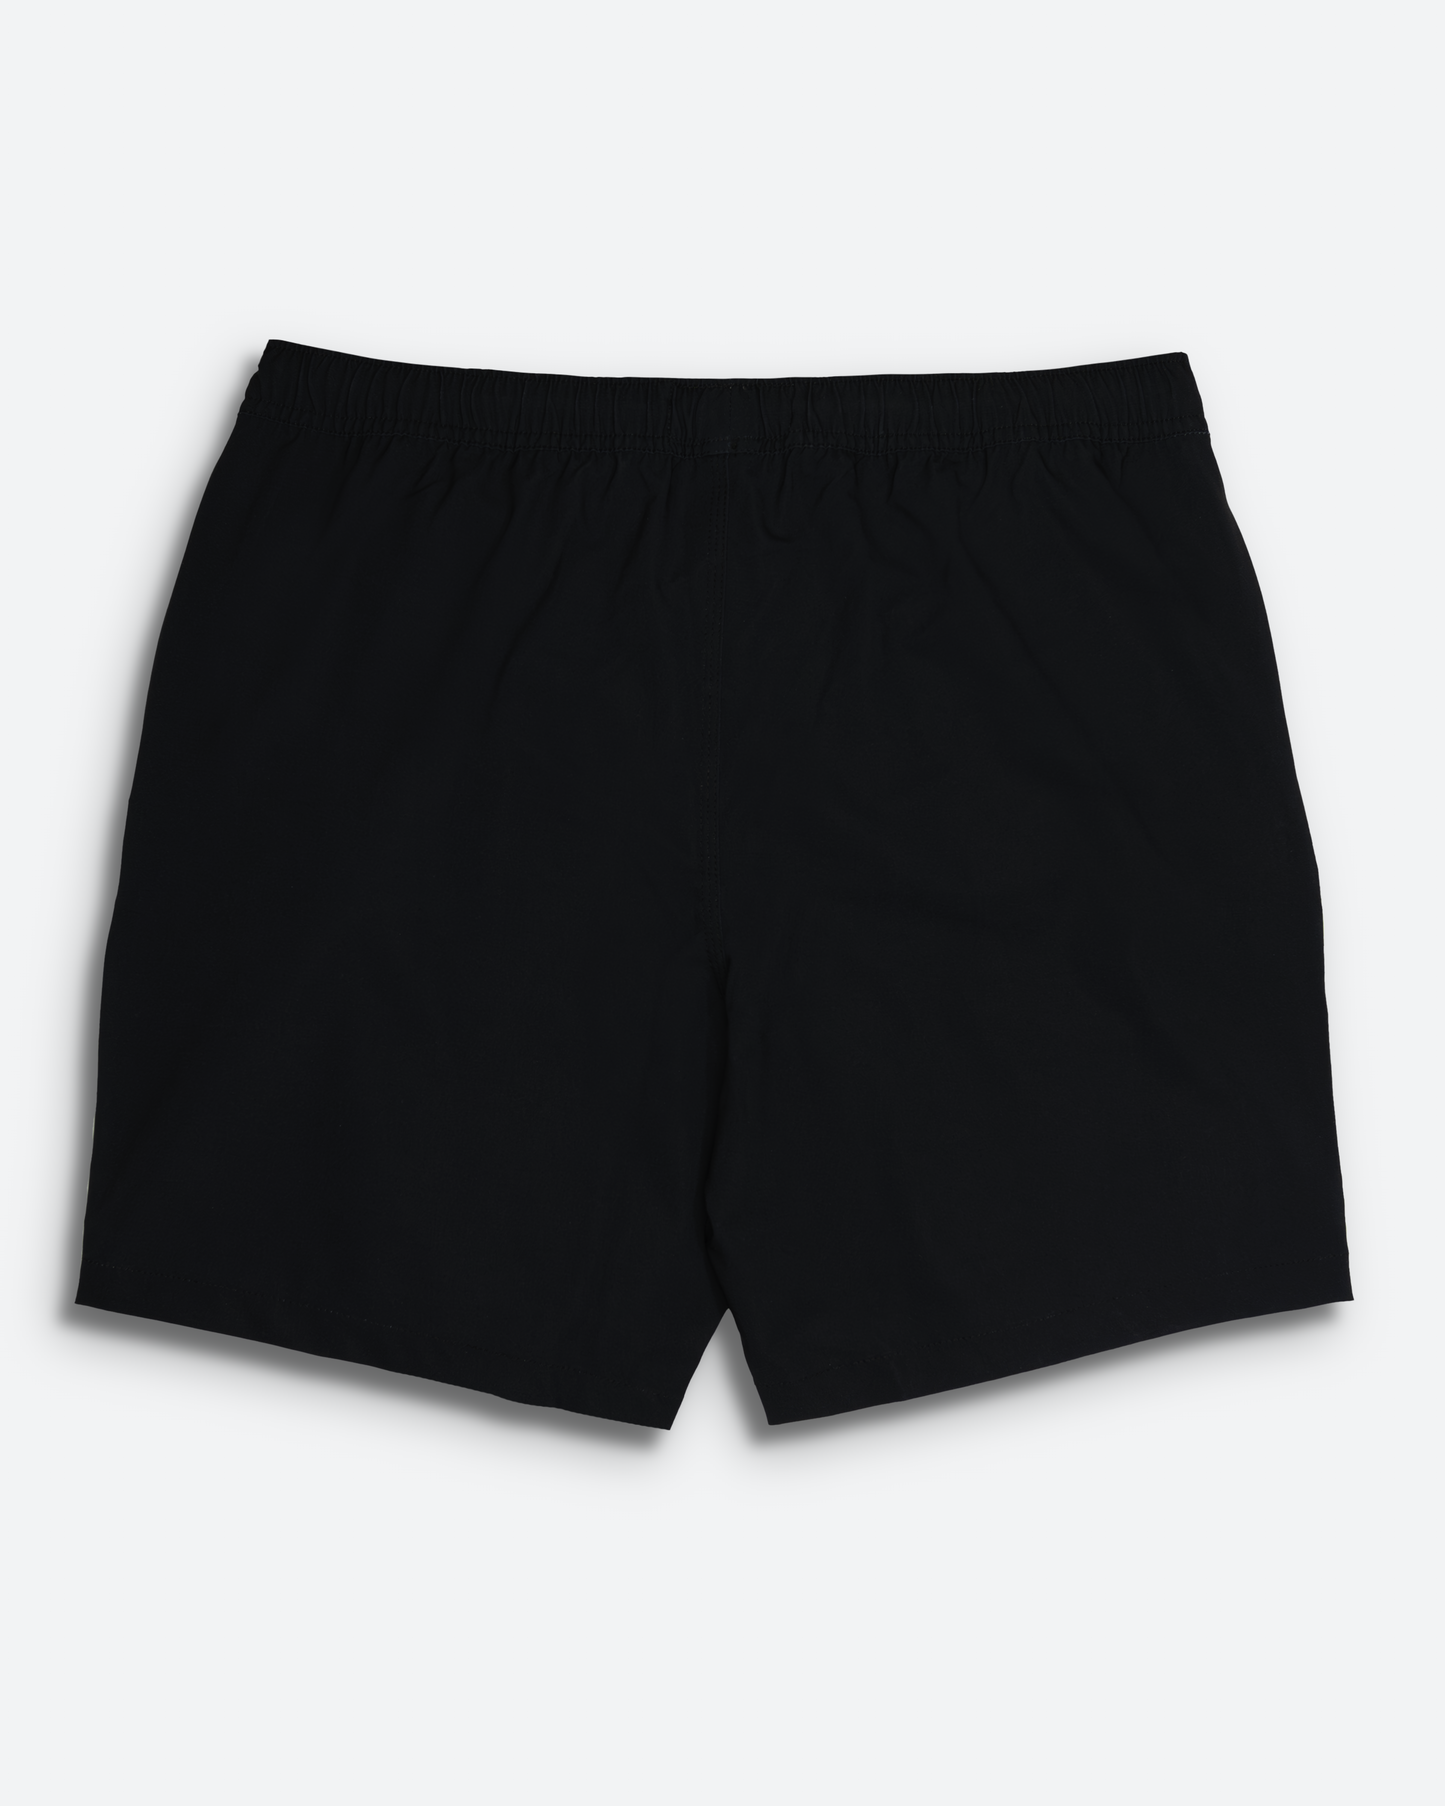 Accelerate Series All-In-One Volley Shorts Mighty Seas x Black 17"